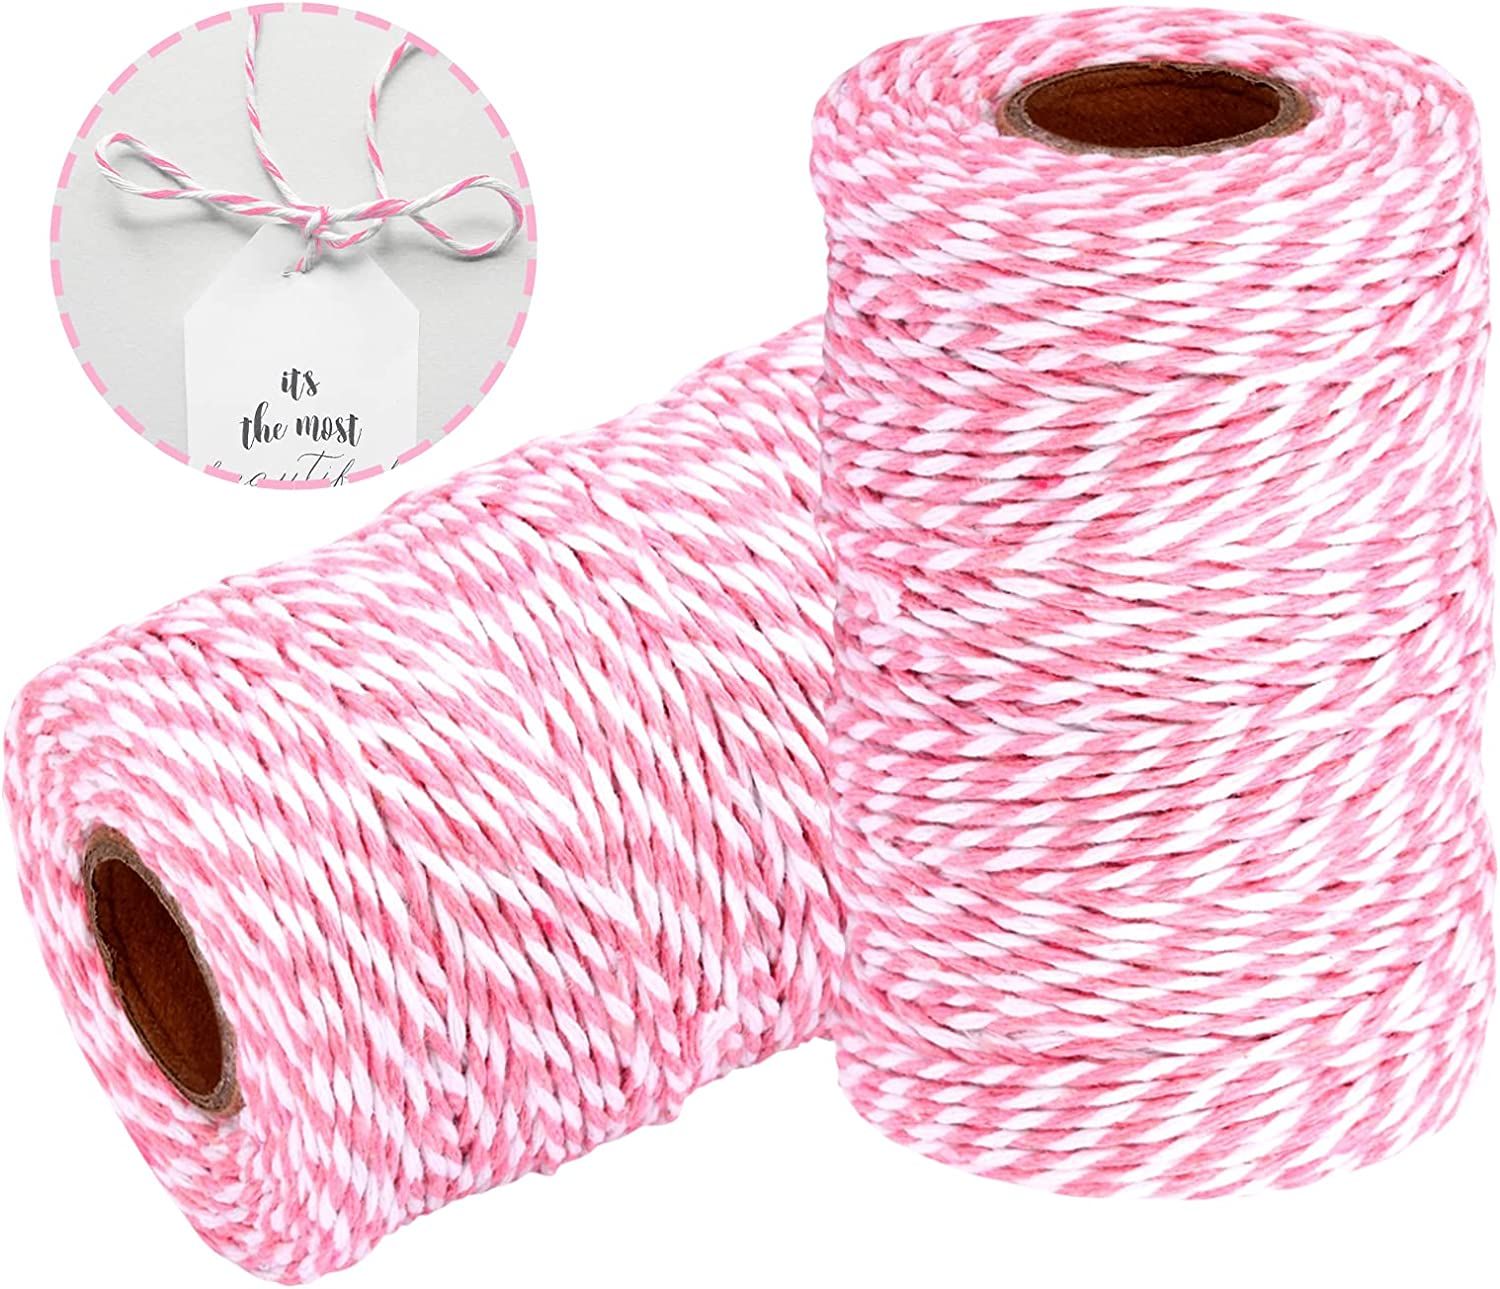 YZSFIRM 656 Feet Christmas Packing Twine Pink and White Cotton String,Bakers Twine Packing Cord f... | Amazon (US)